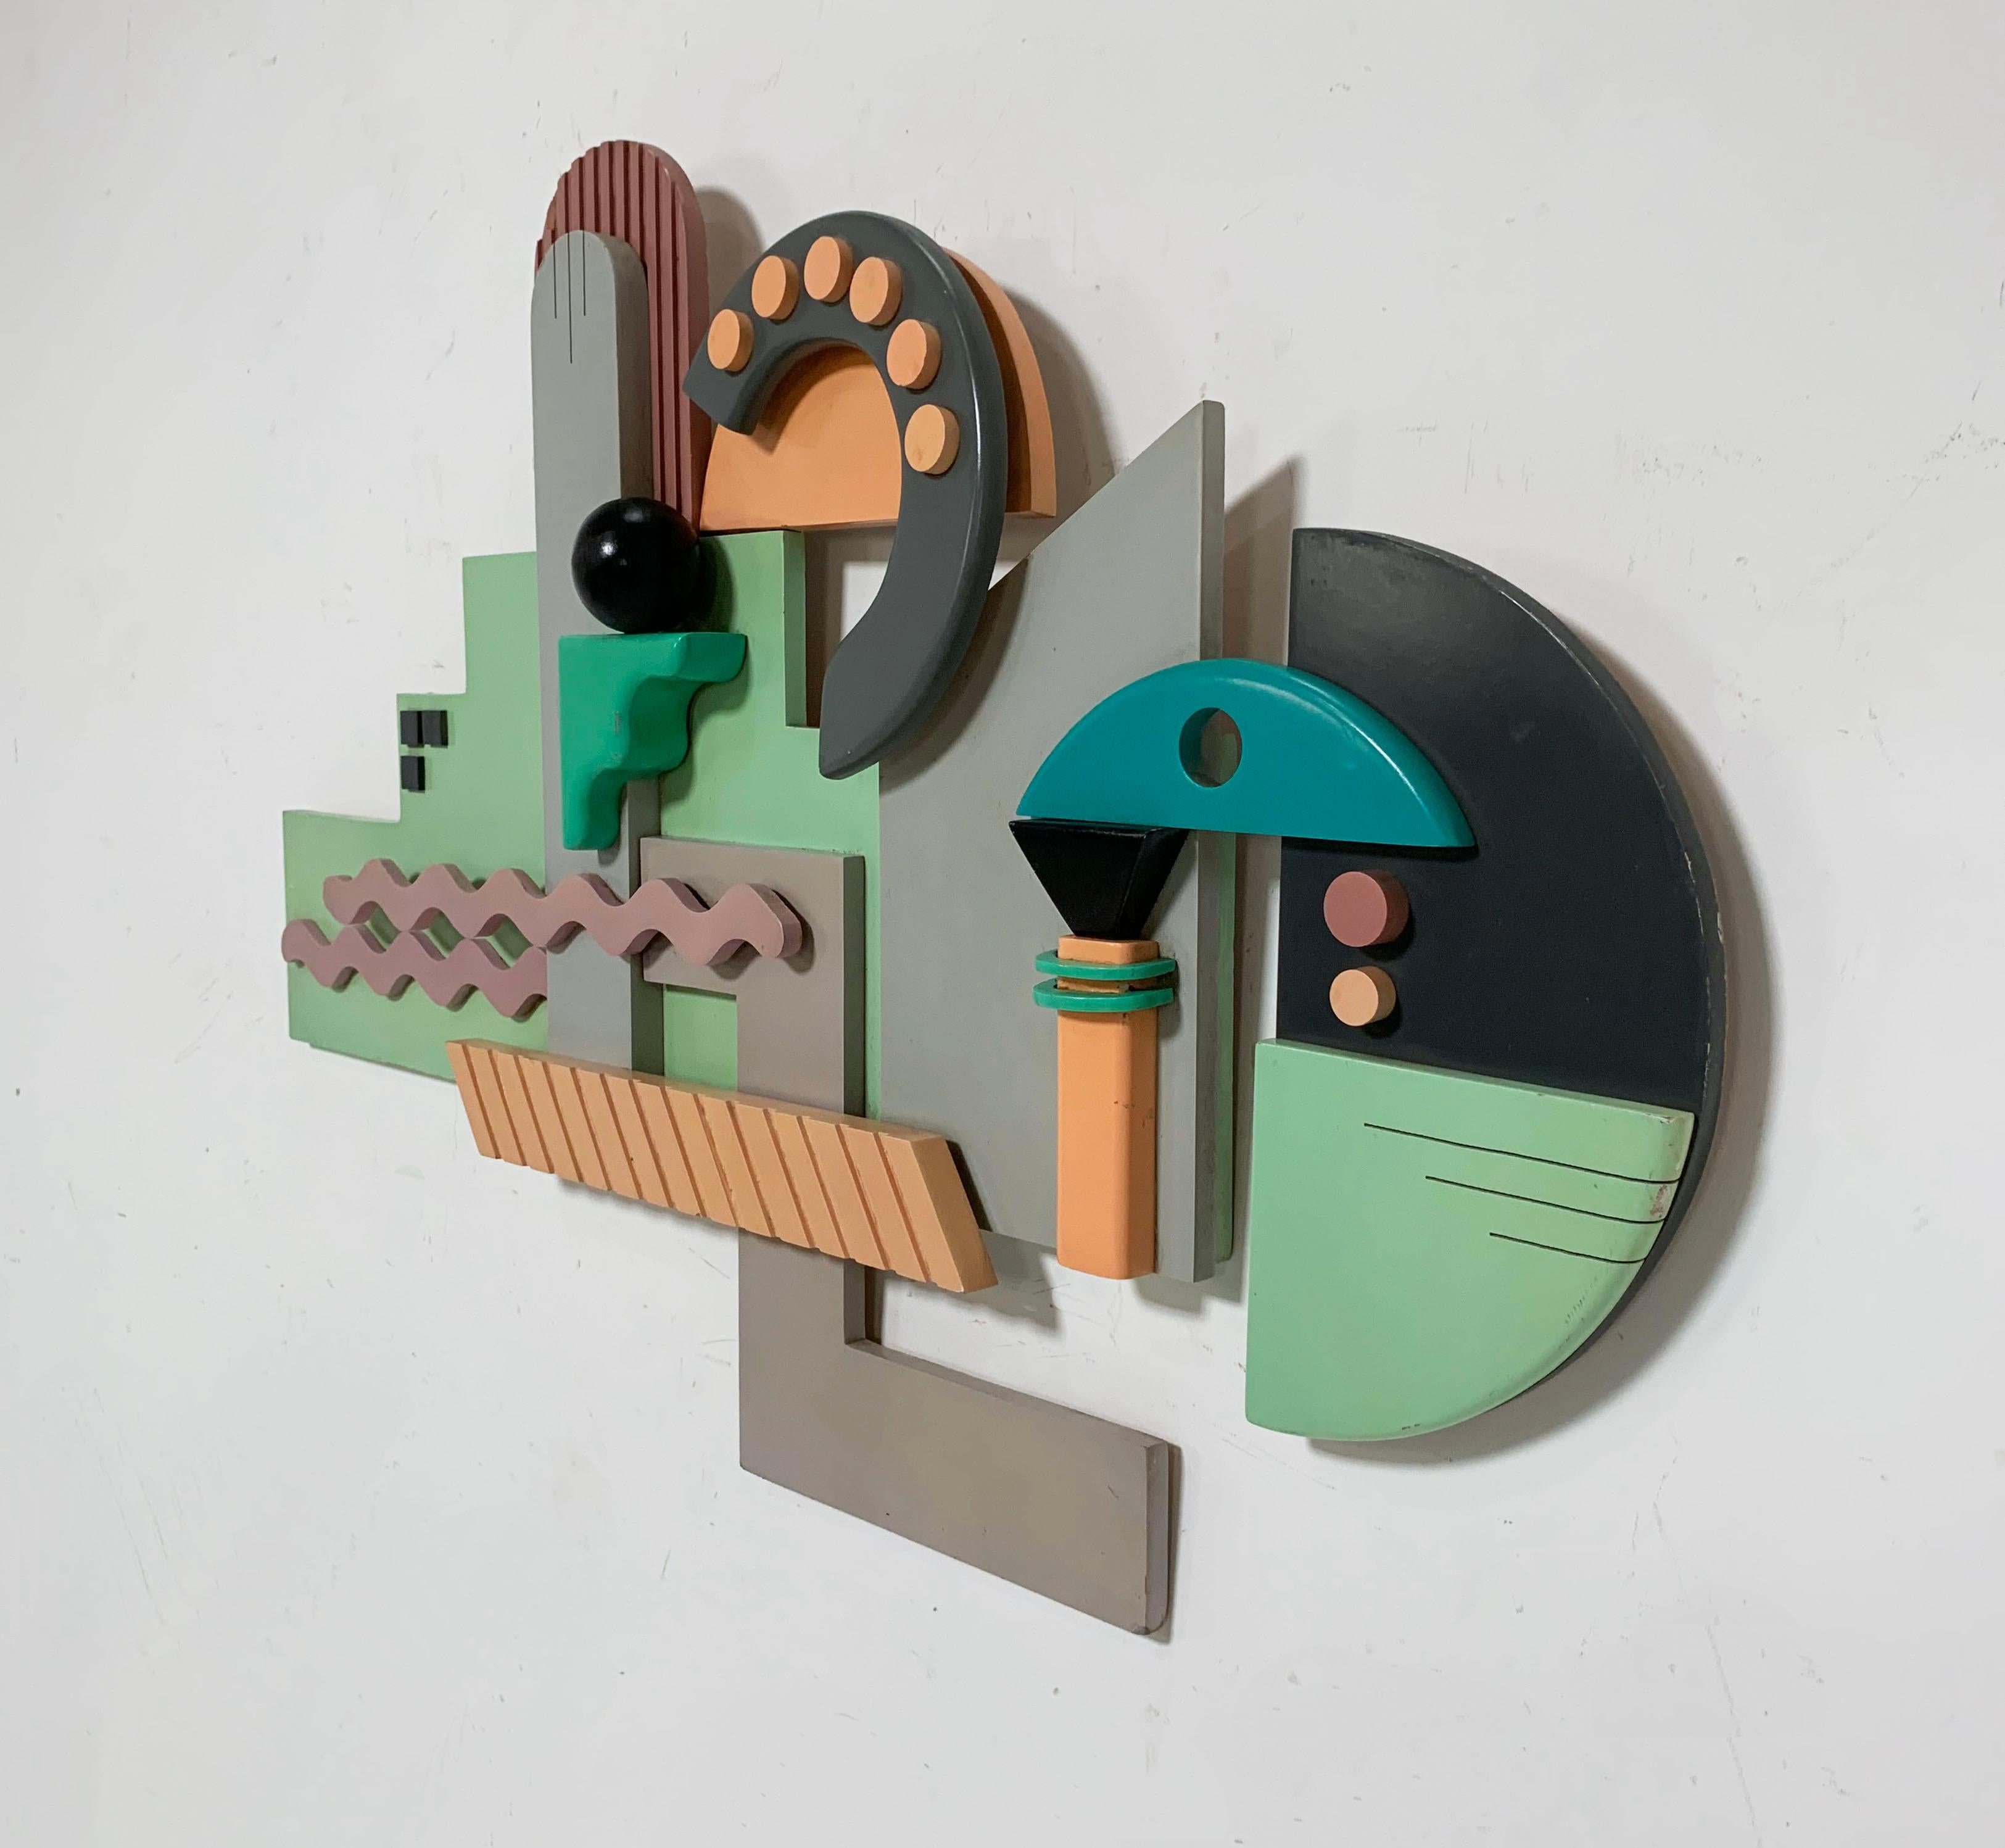 Lacquered wood wall sculpture by Bob Stimmel, numbered 9/125, circa 1980s. In the manner of the Memphis Group.